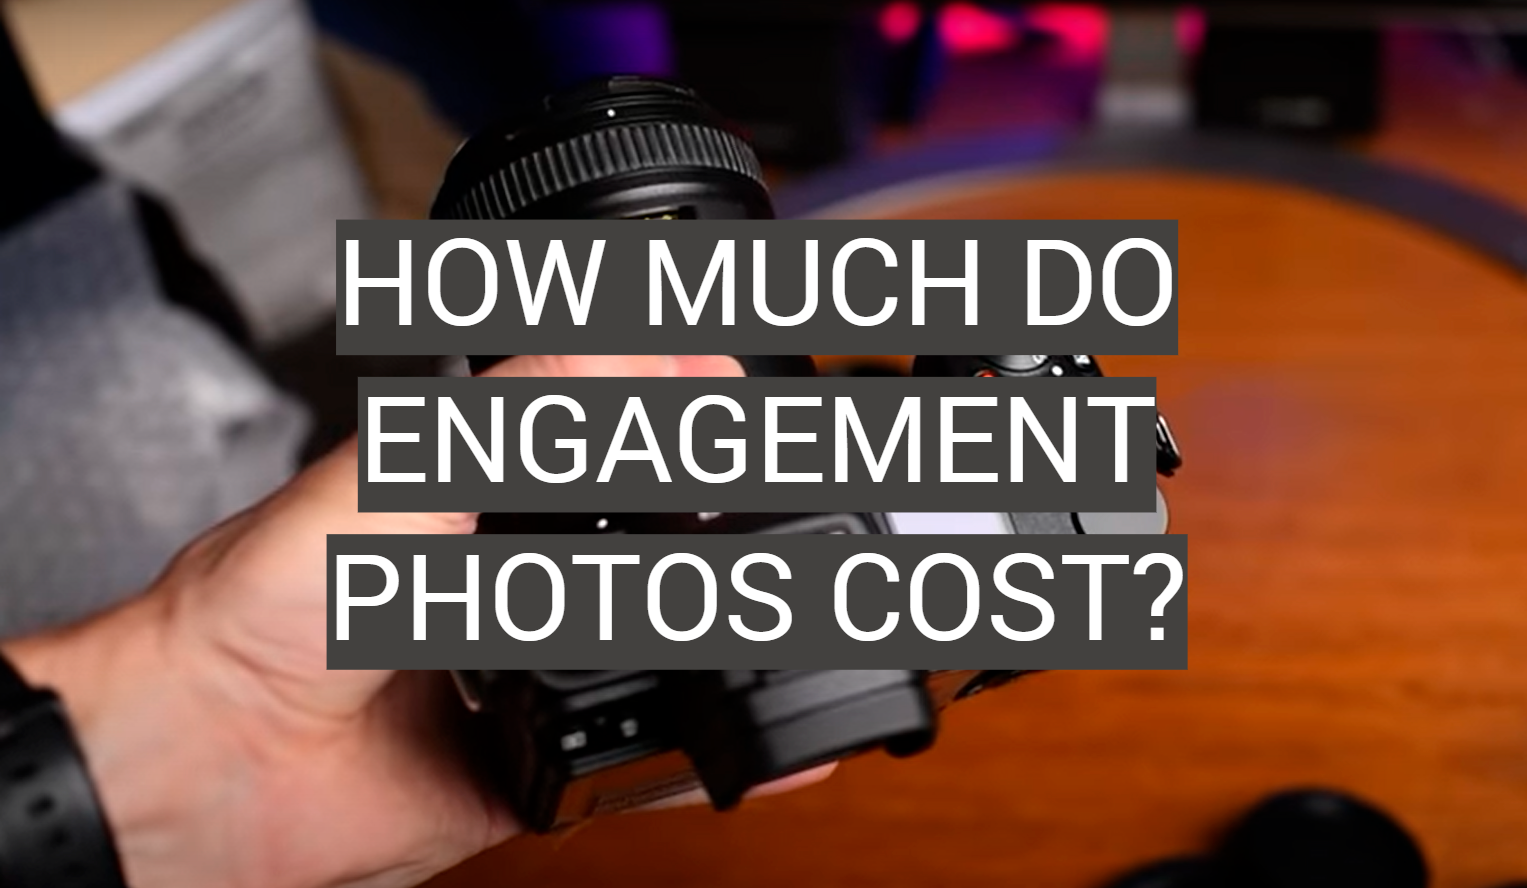 How Much Do Engagement Photos Cost?